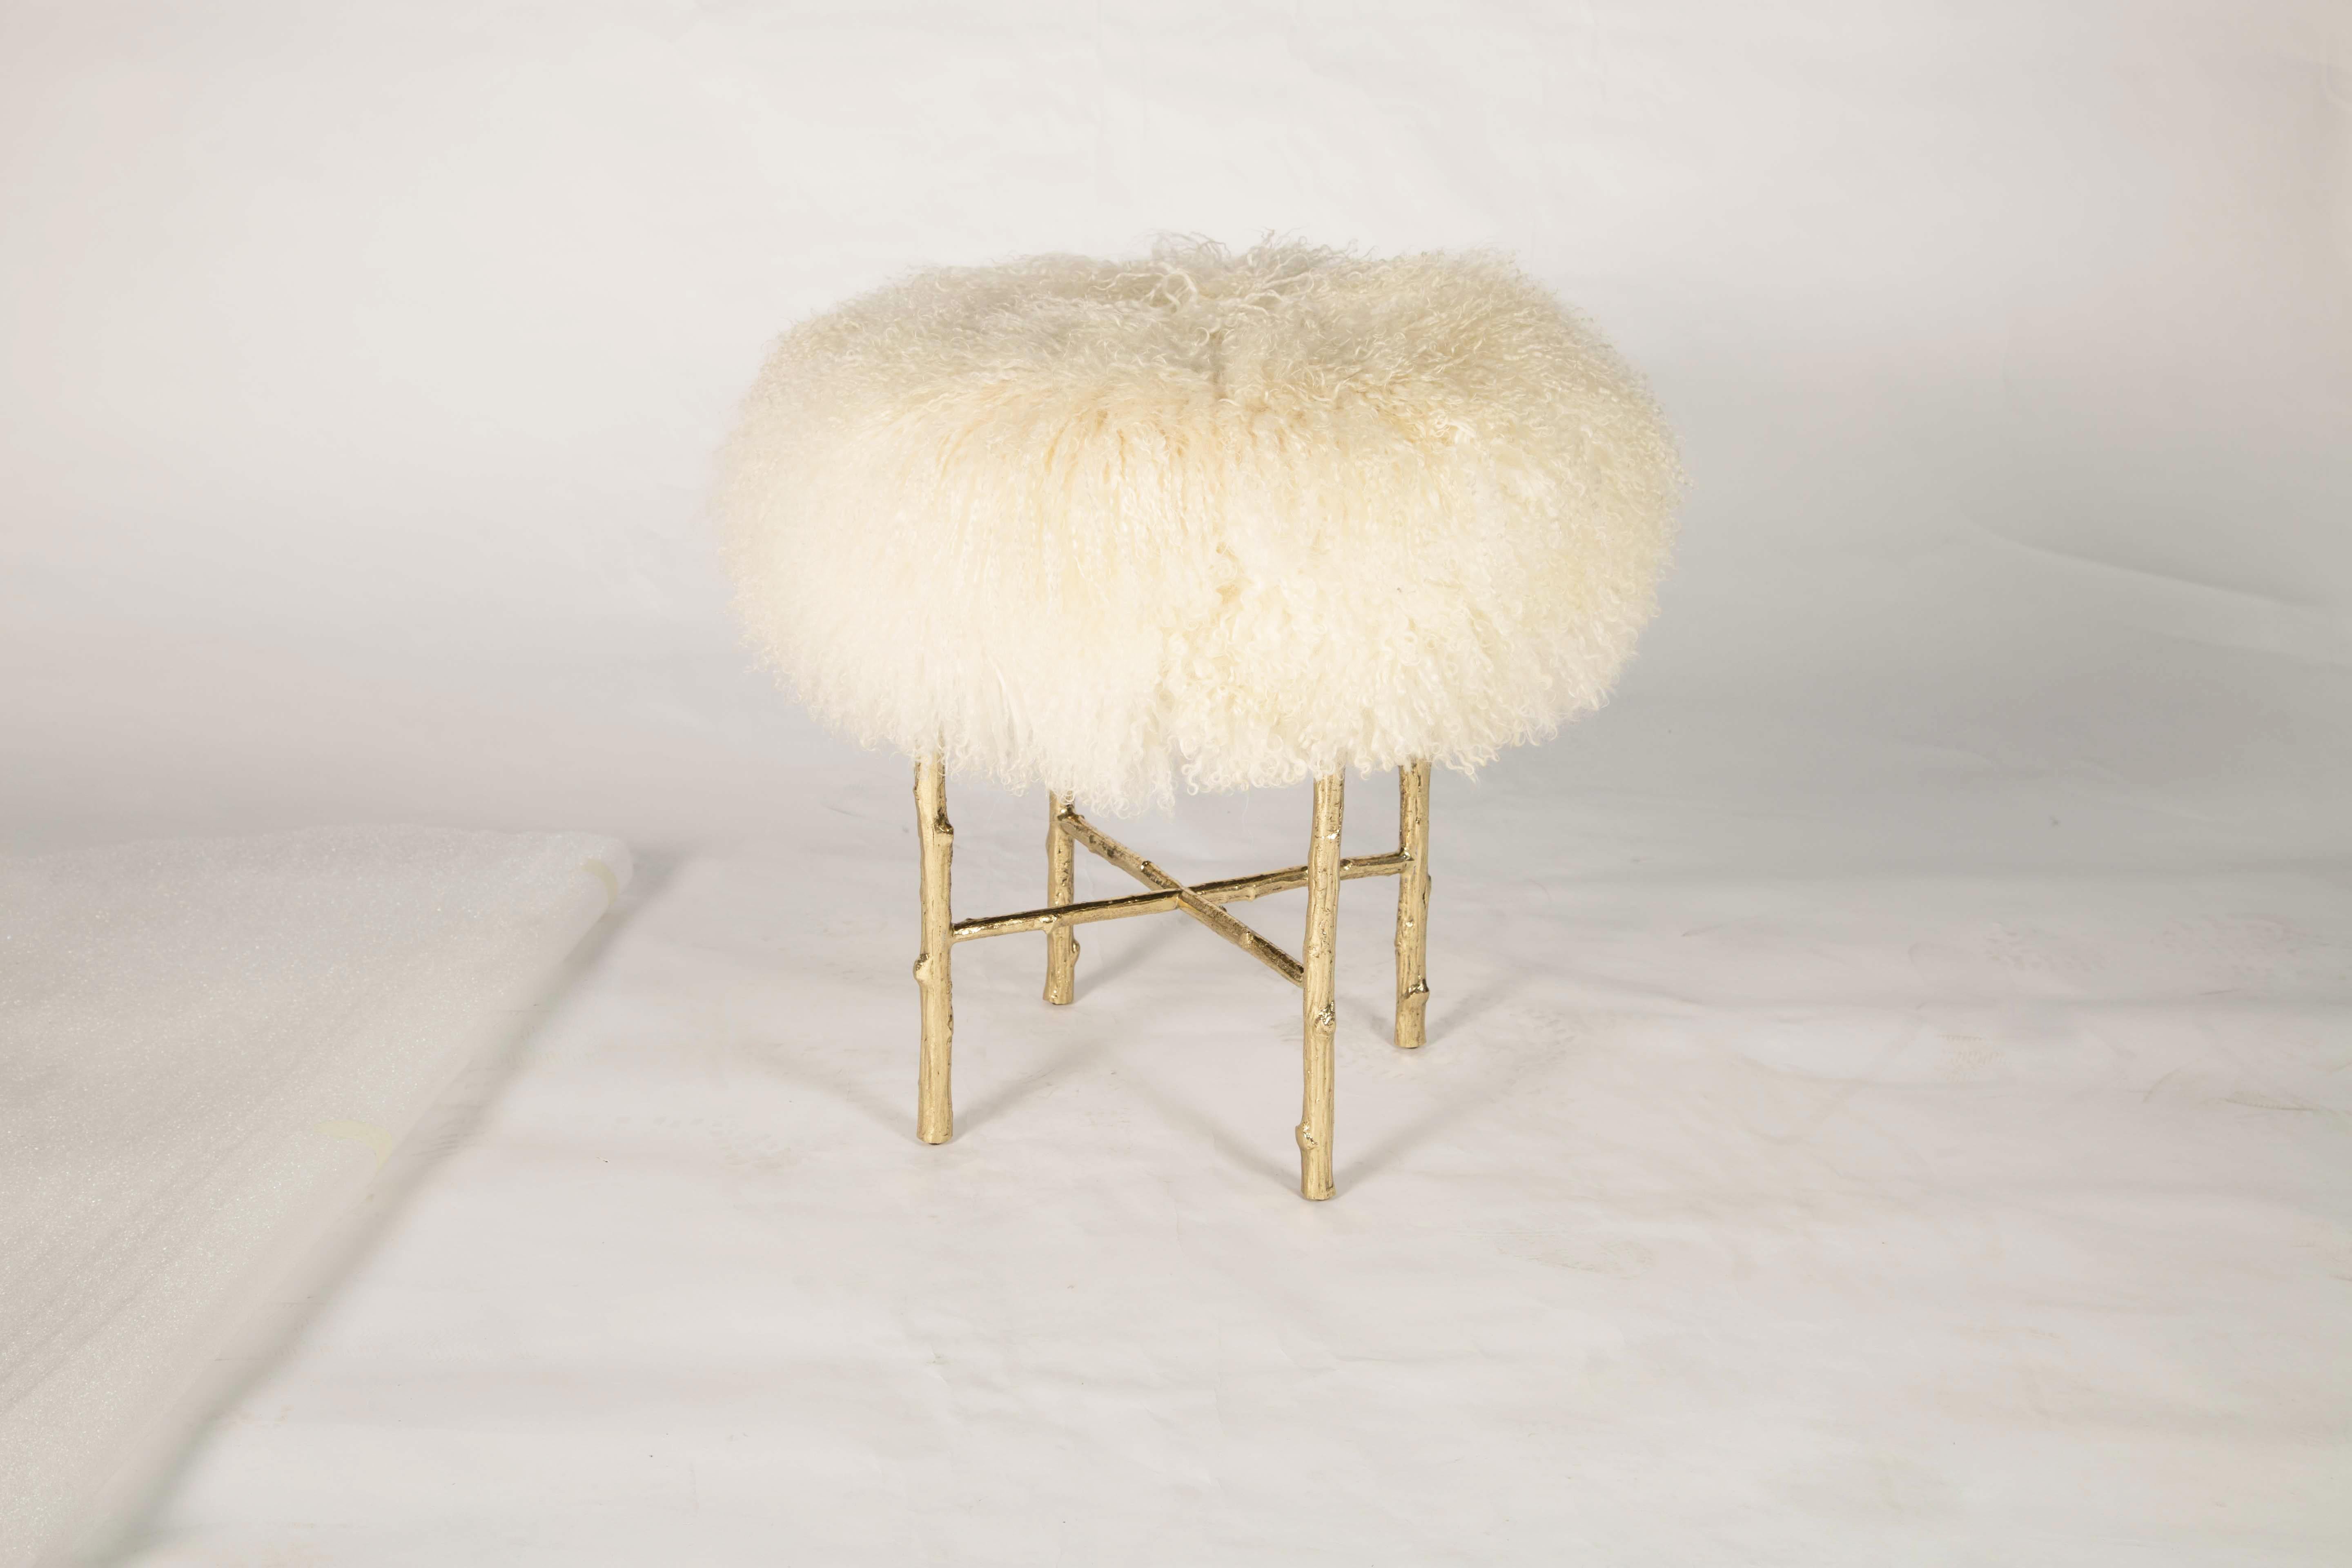 Portuguese Organic Modern Country Stool in Polished Brass Cast, Inspired by Nature For Sale